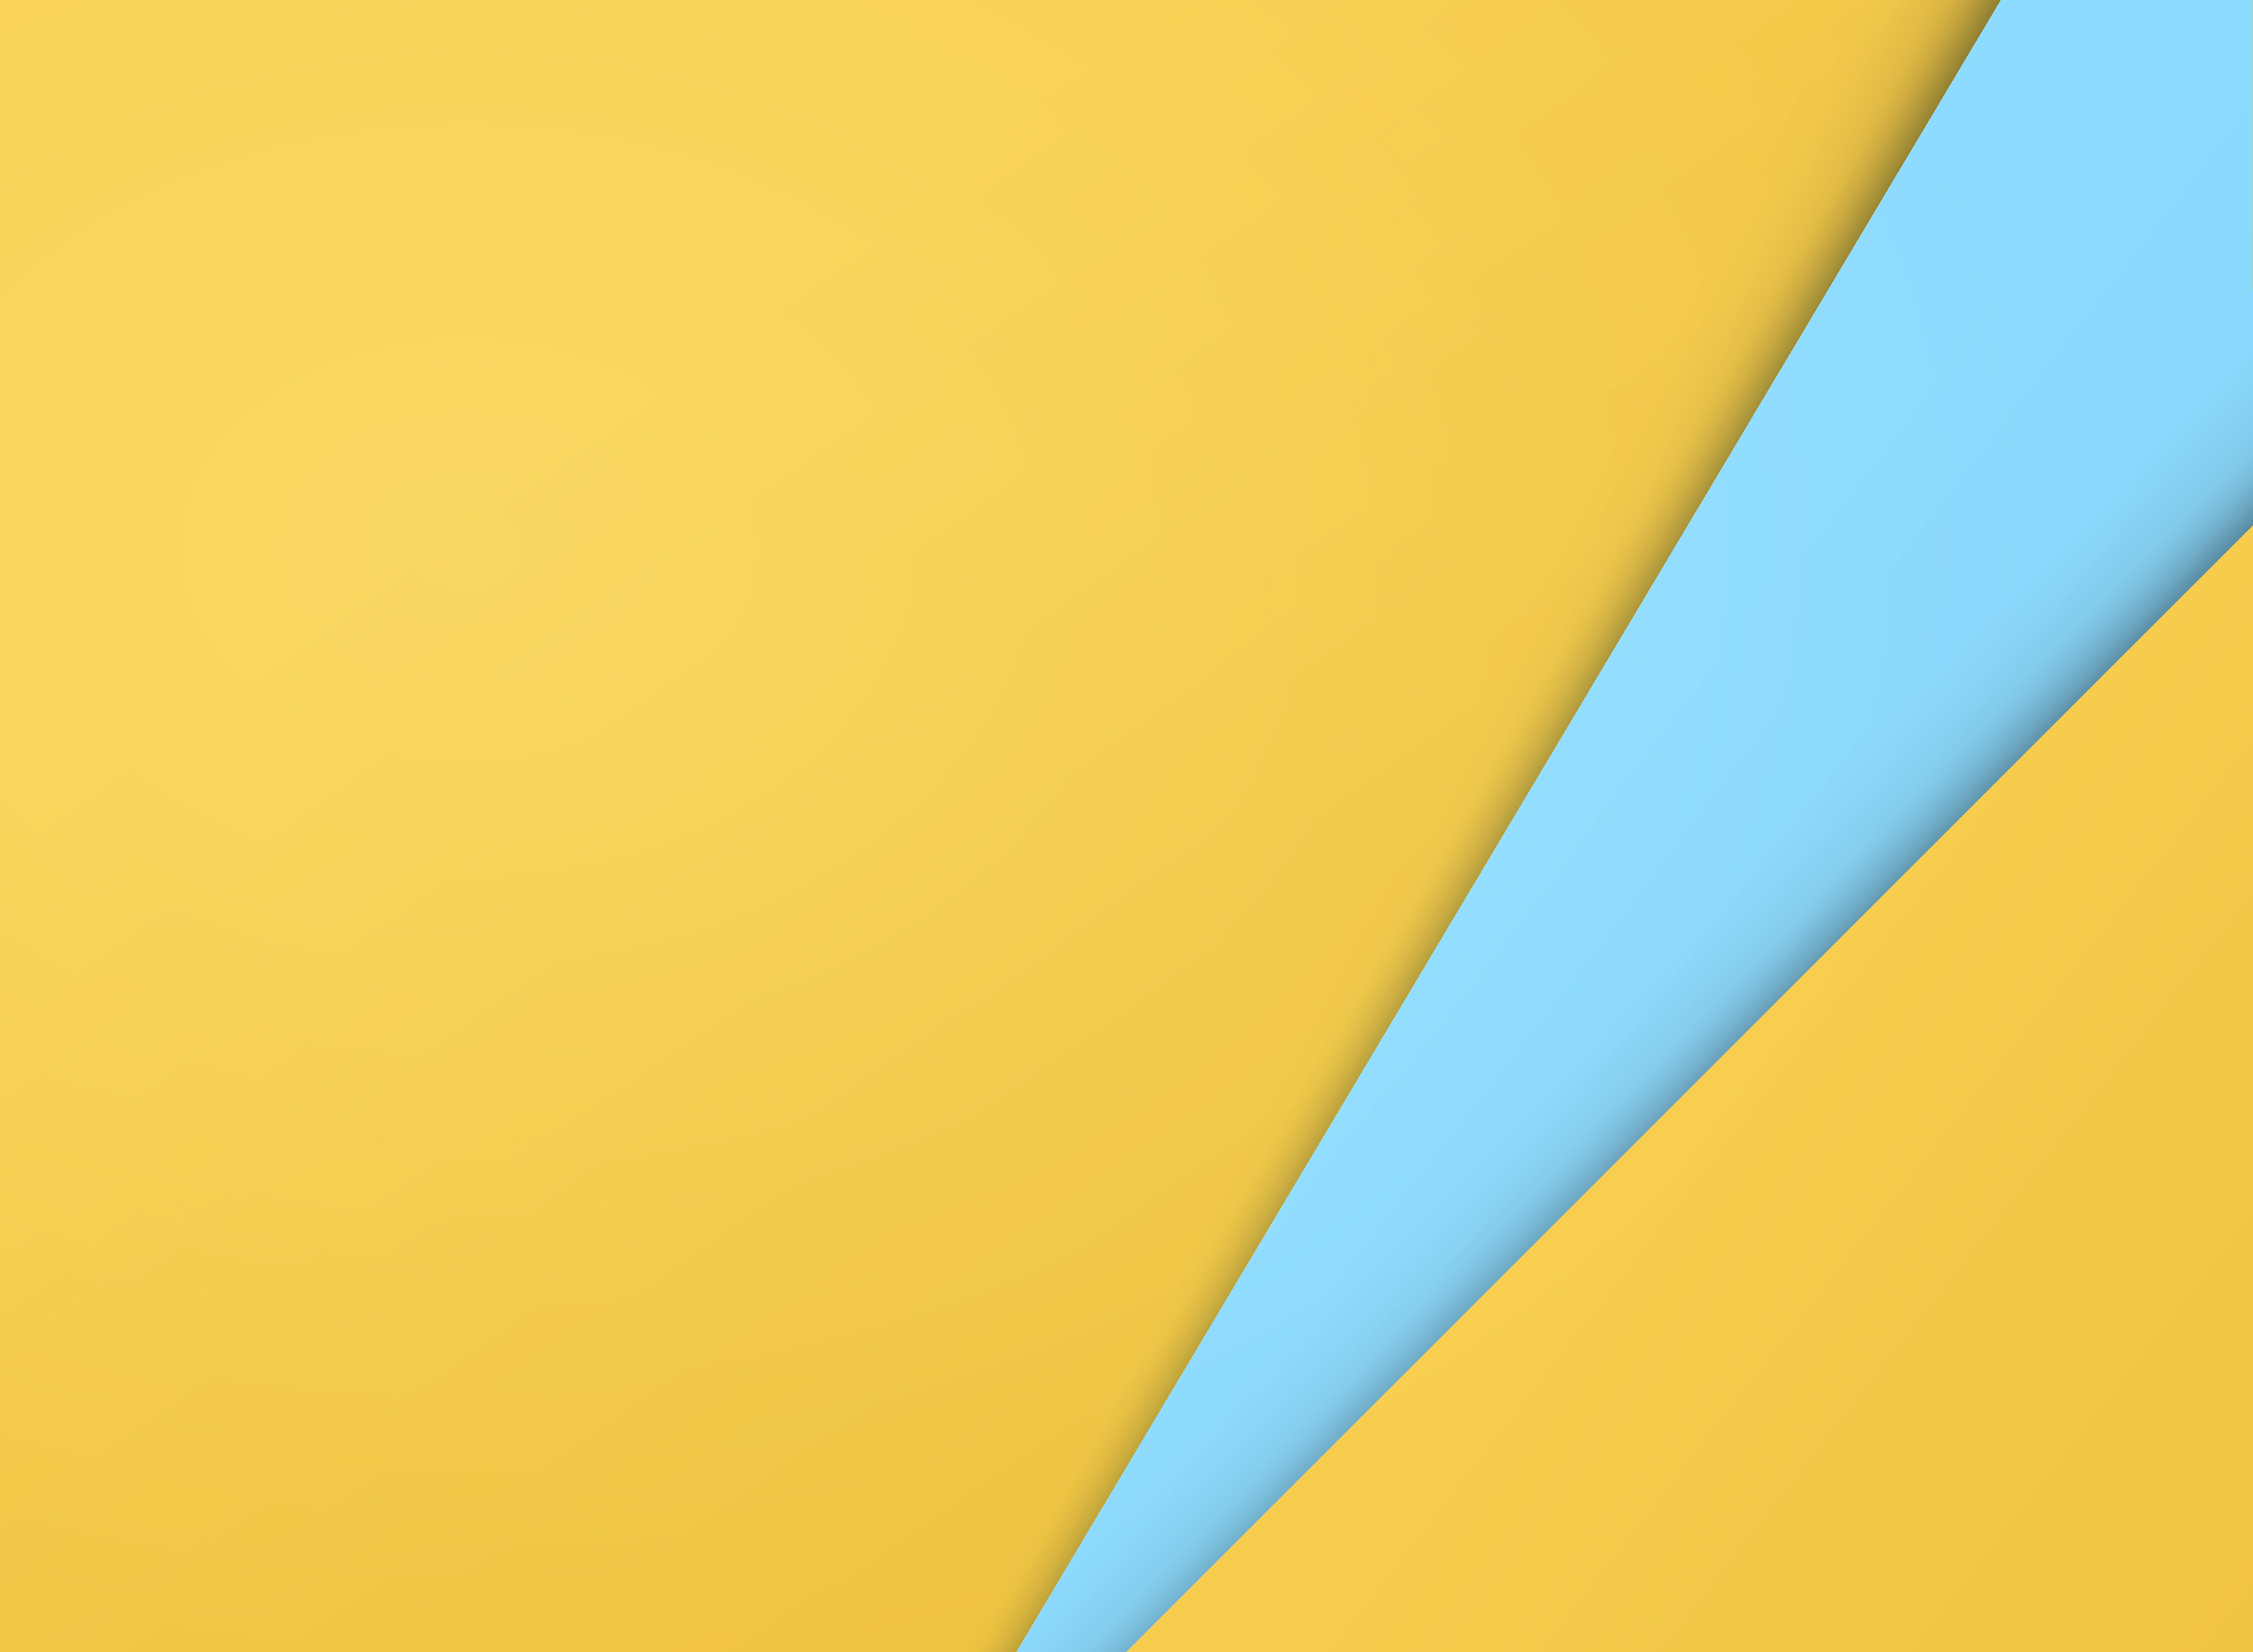 Abstract Simple Cut Paper Effect Gradient Yellow And Blue